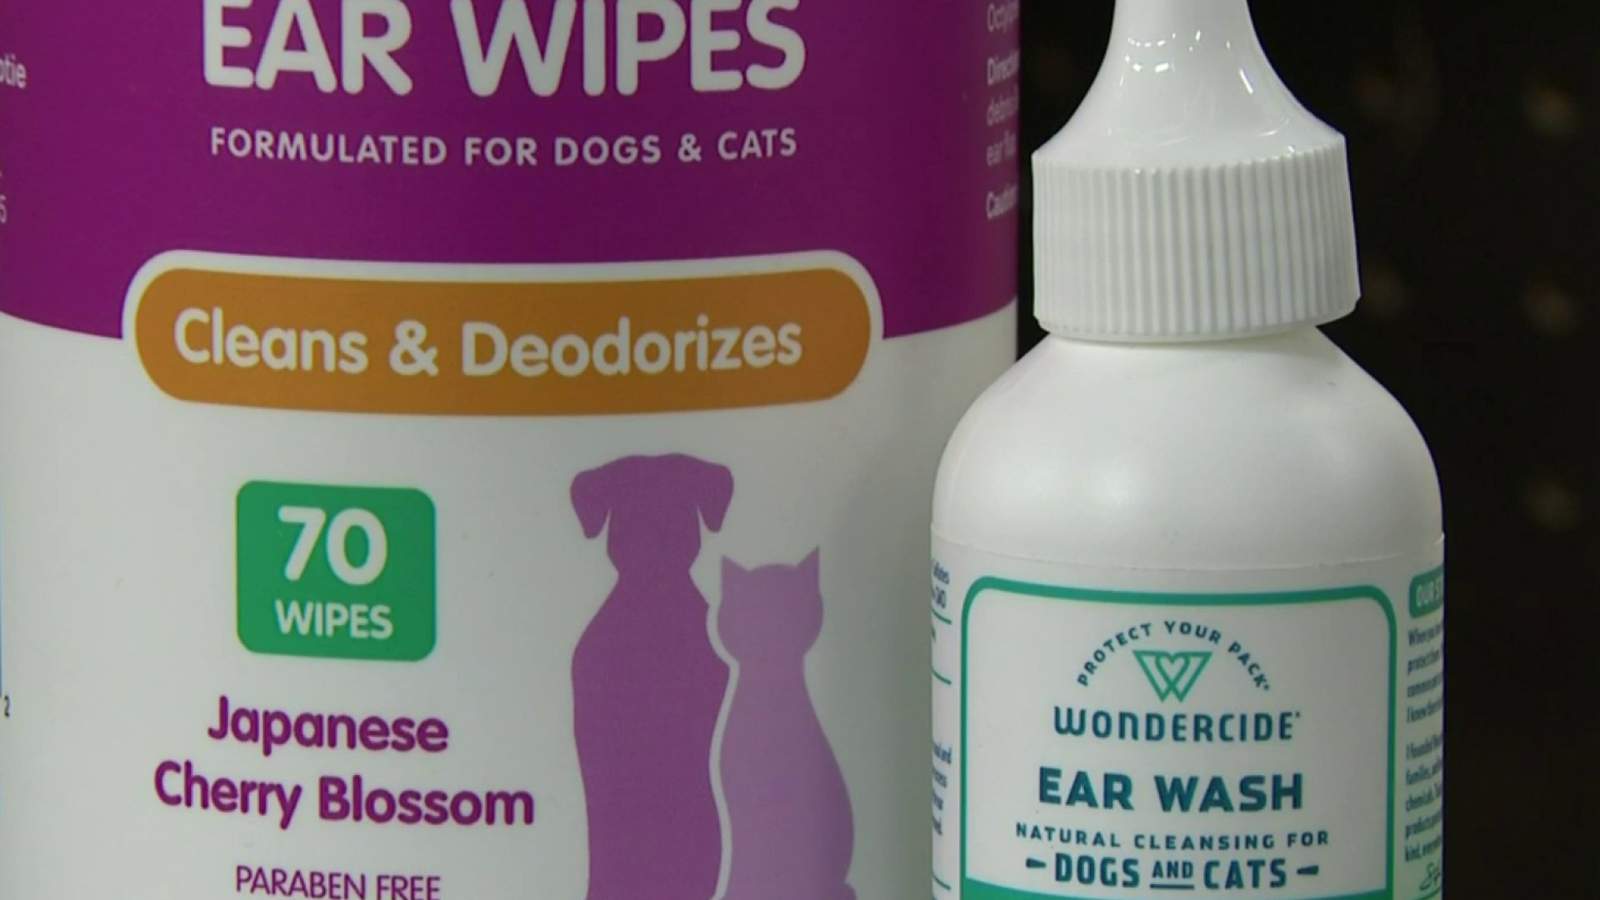 Tips on how to keep your pets ears clean